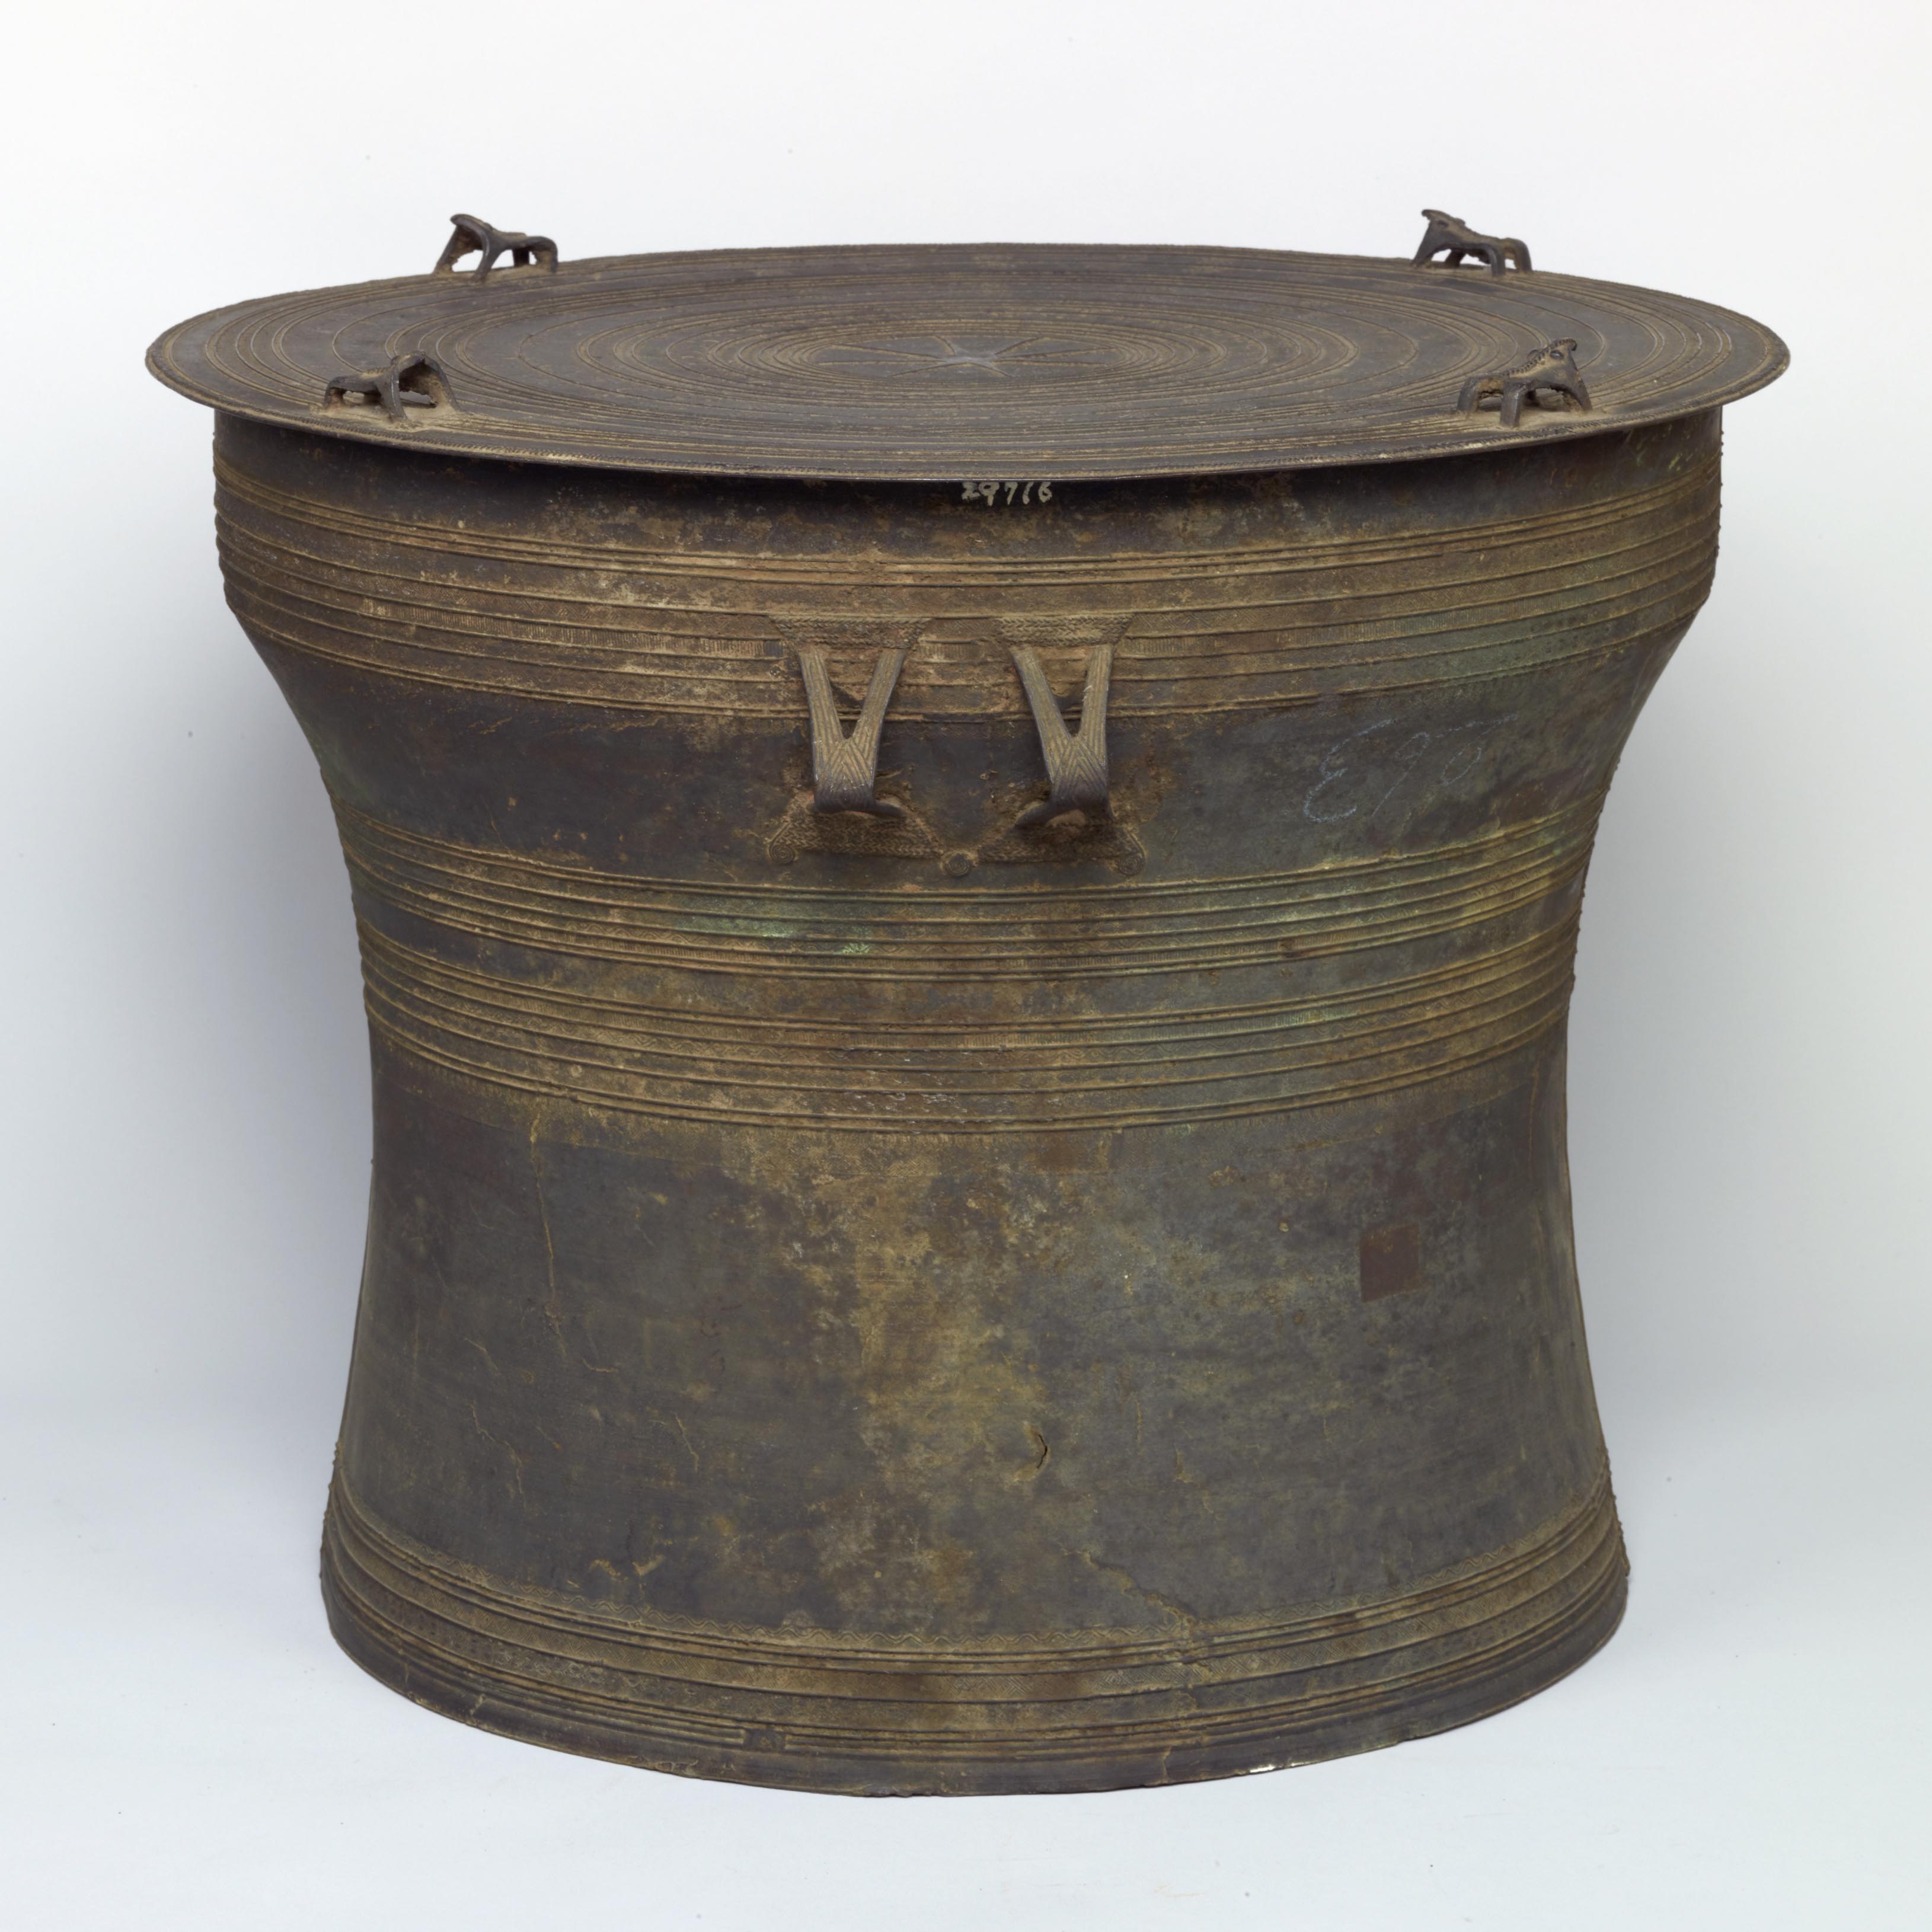 Image of "Bronze Drum, Northern Thailand, 15th–17th century (Gift of Prince Damrong, Thailand)"